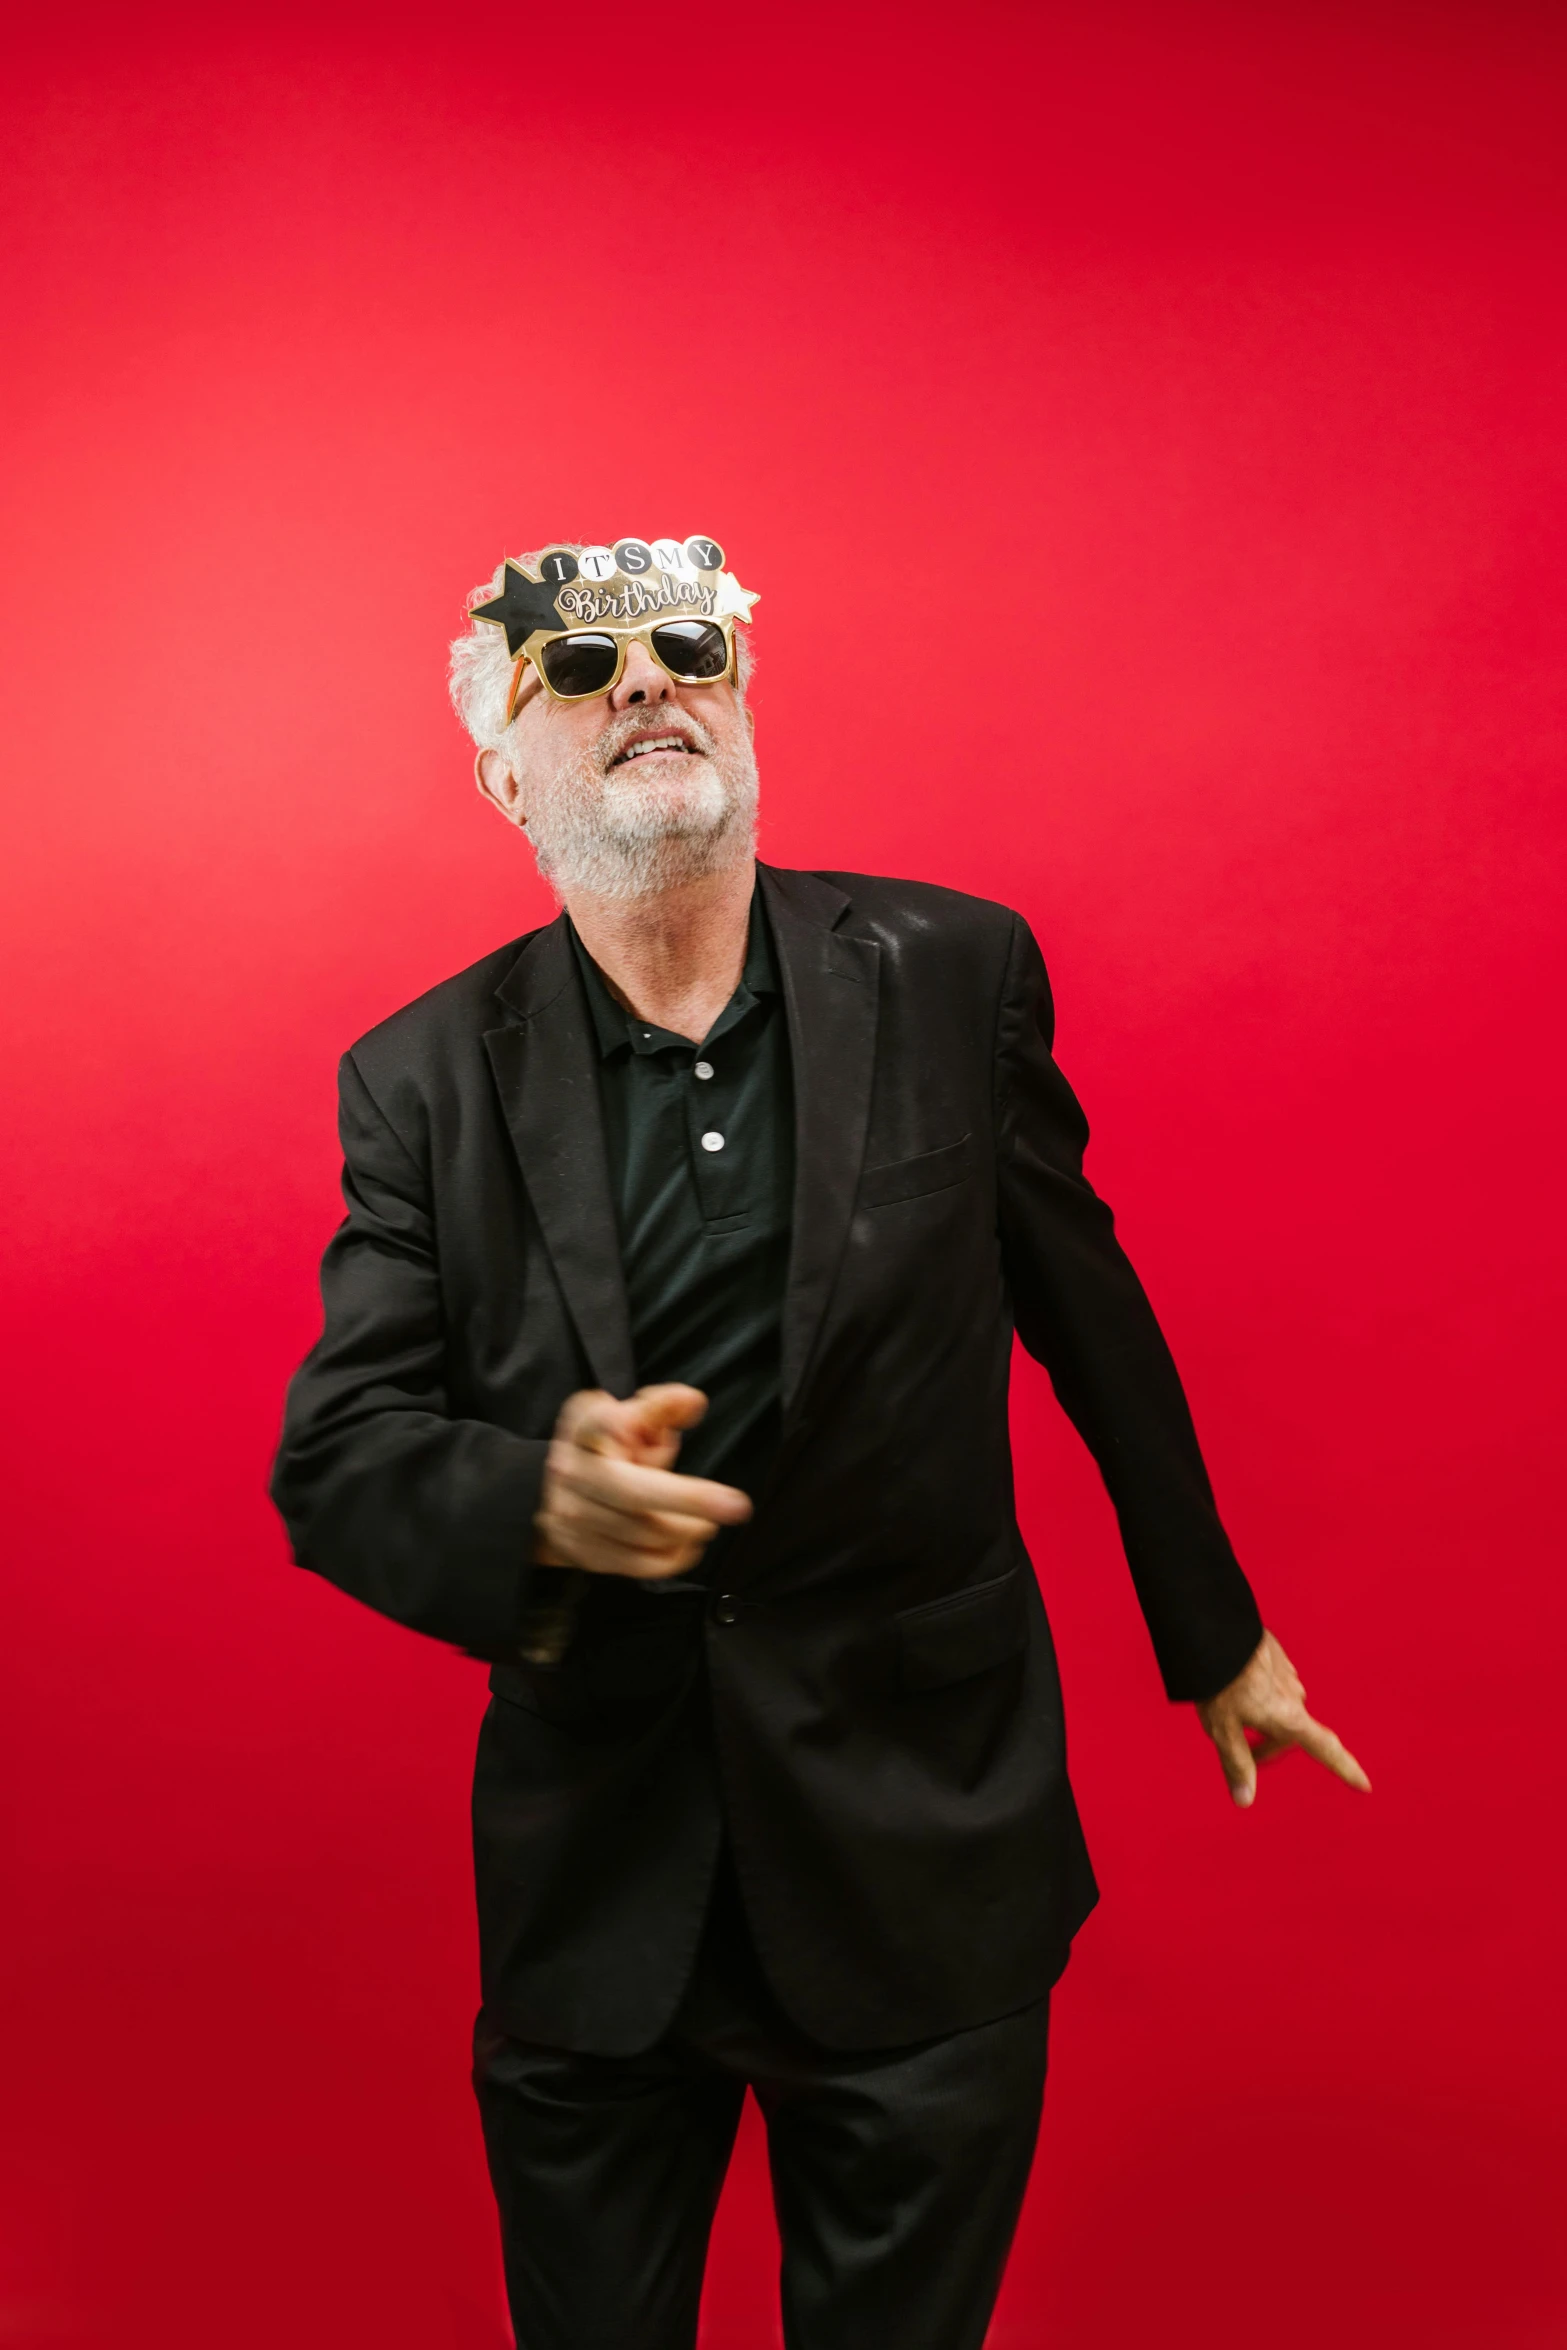 a man in a suit and sunglasses on a red background, overalls and a white beard, in an action pose, wearing a party hat, bill stoneham